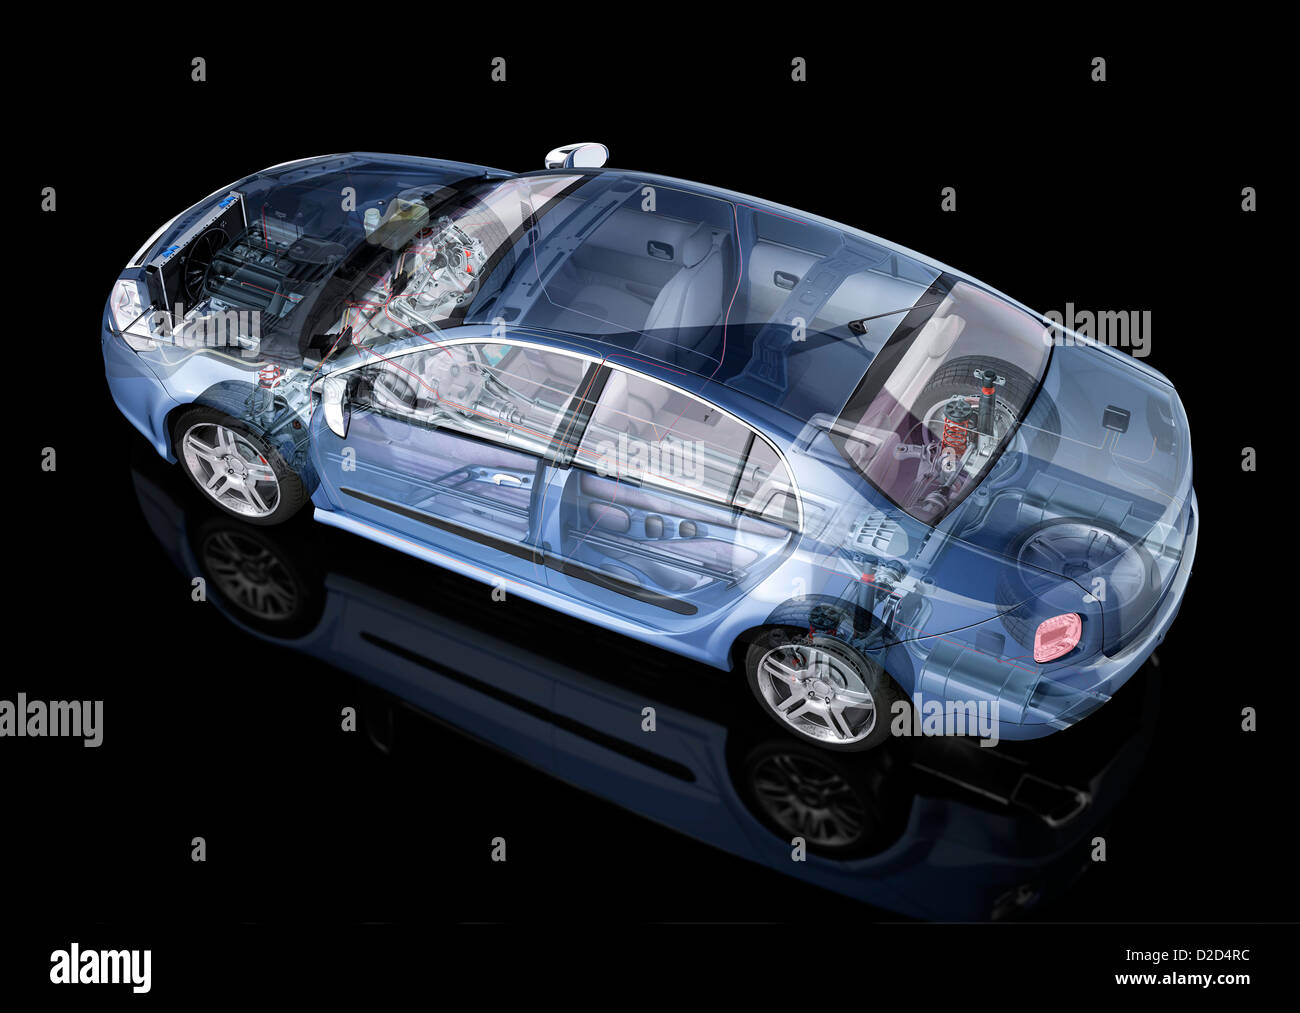 Car Computer artwork showing internal structures Stock Photo